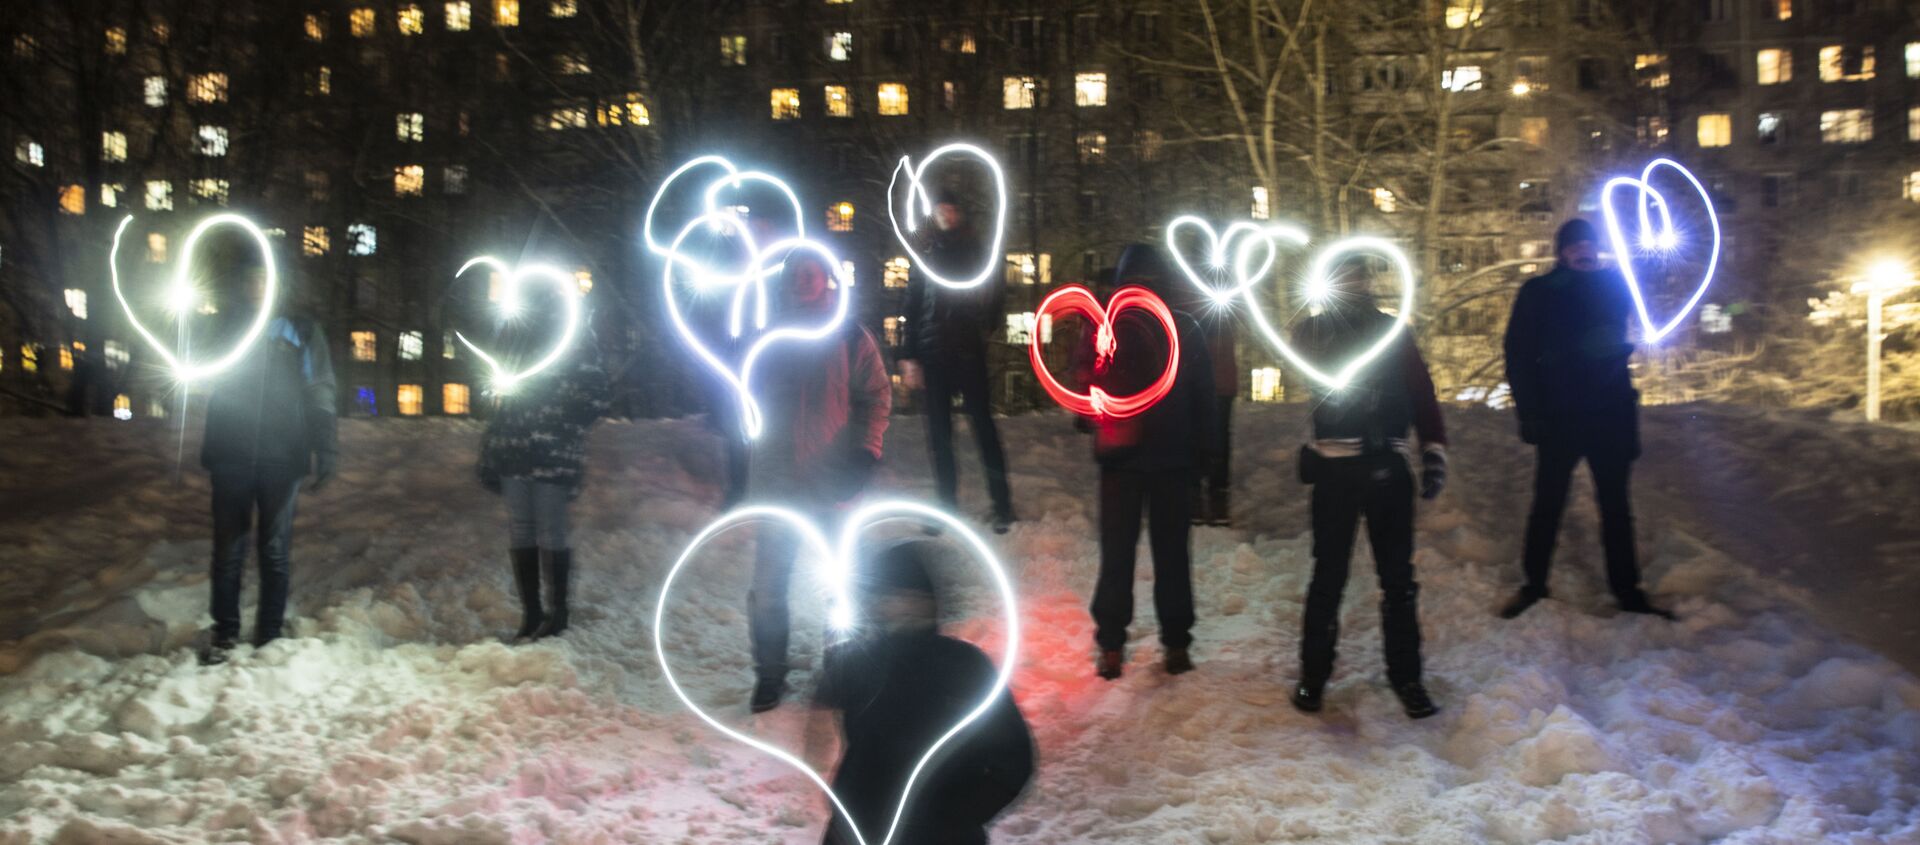 People draw hearts with their cellphones flashlights in support of jailed opposition figure Alexei Navalny in Moscow on 14 February.  - Sputnik International, 1920, 15.02.2021